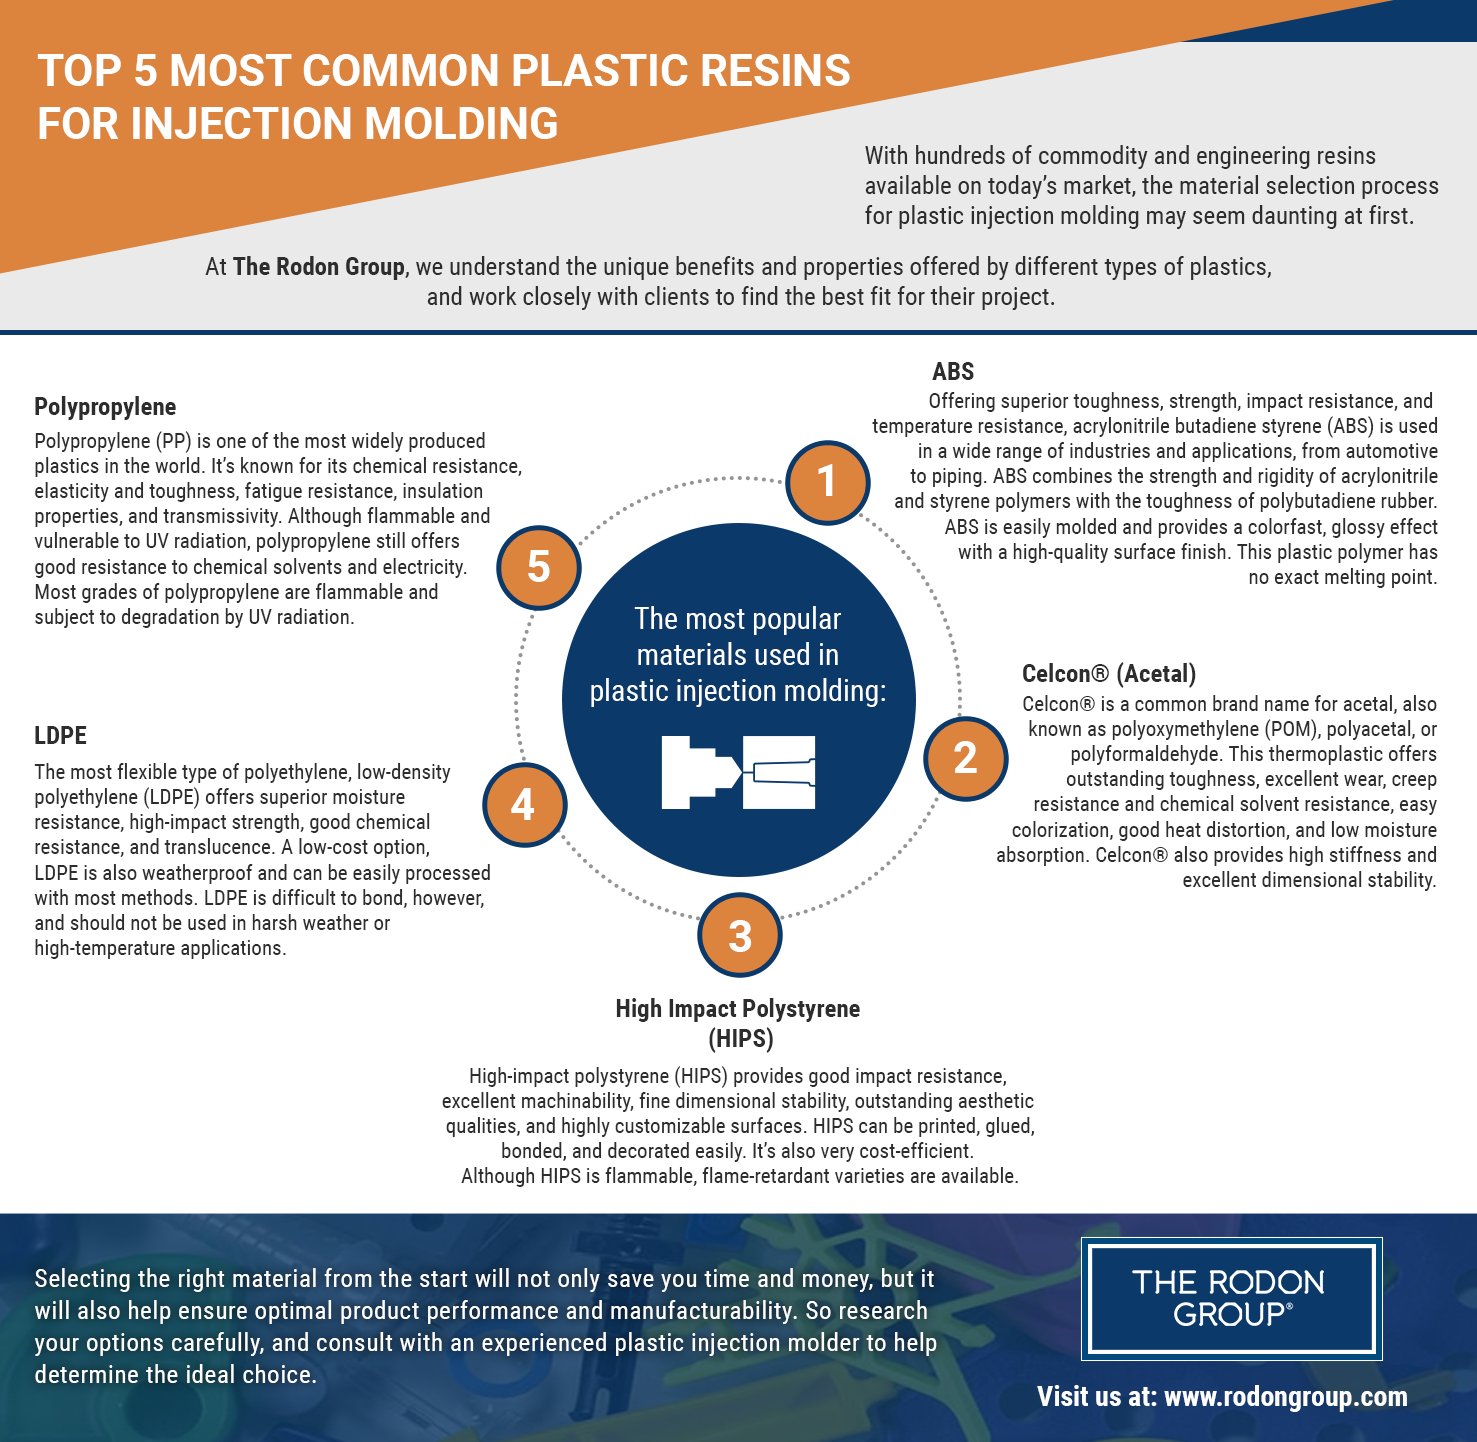 Material Selection for Plastic Injection | The Rodon Group | The Rodon Group®